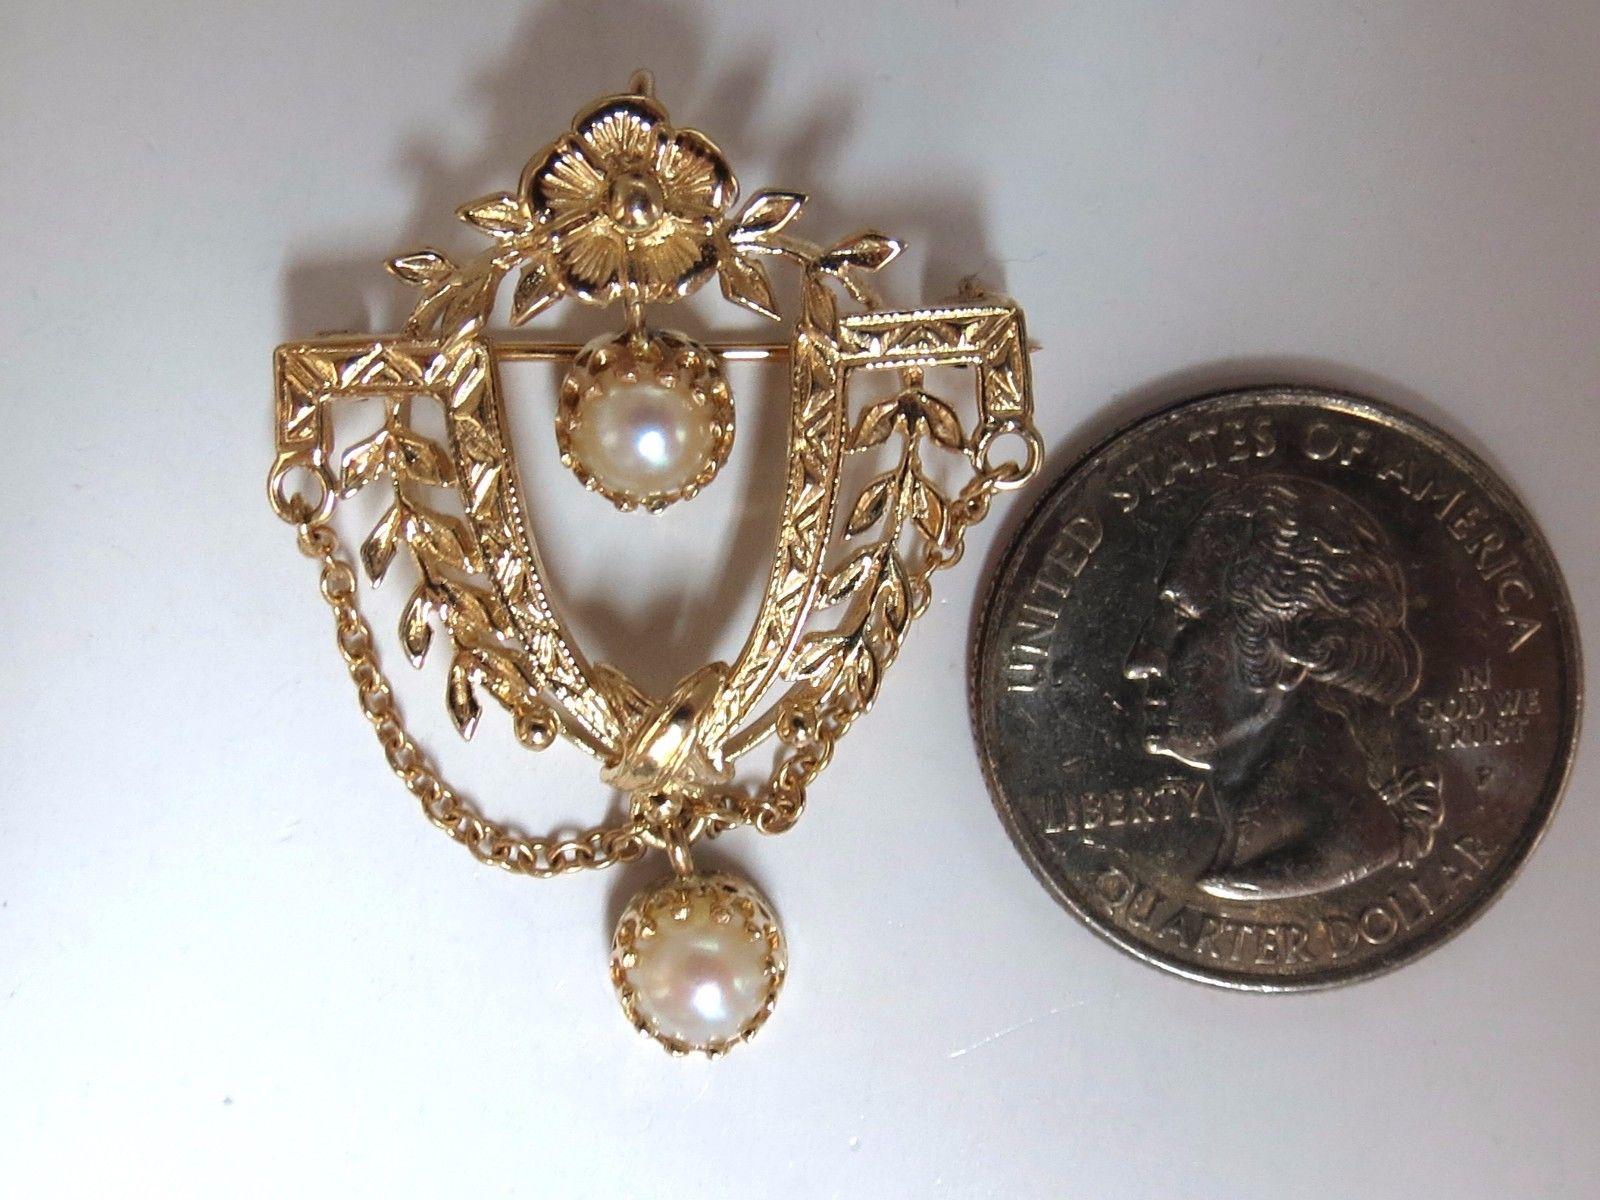 1970's Medallion Pearl Pendant Brooch 

6.5mm mabe pearls

14kt yellow gold

6 grams

28 x 36mm
This brooch will accept 3mm chain 

for optional pendant wear